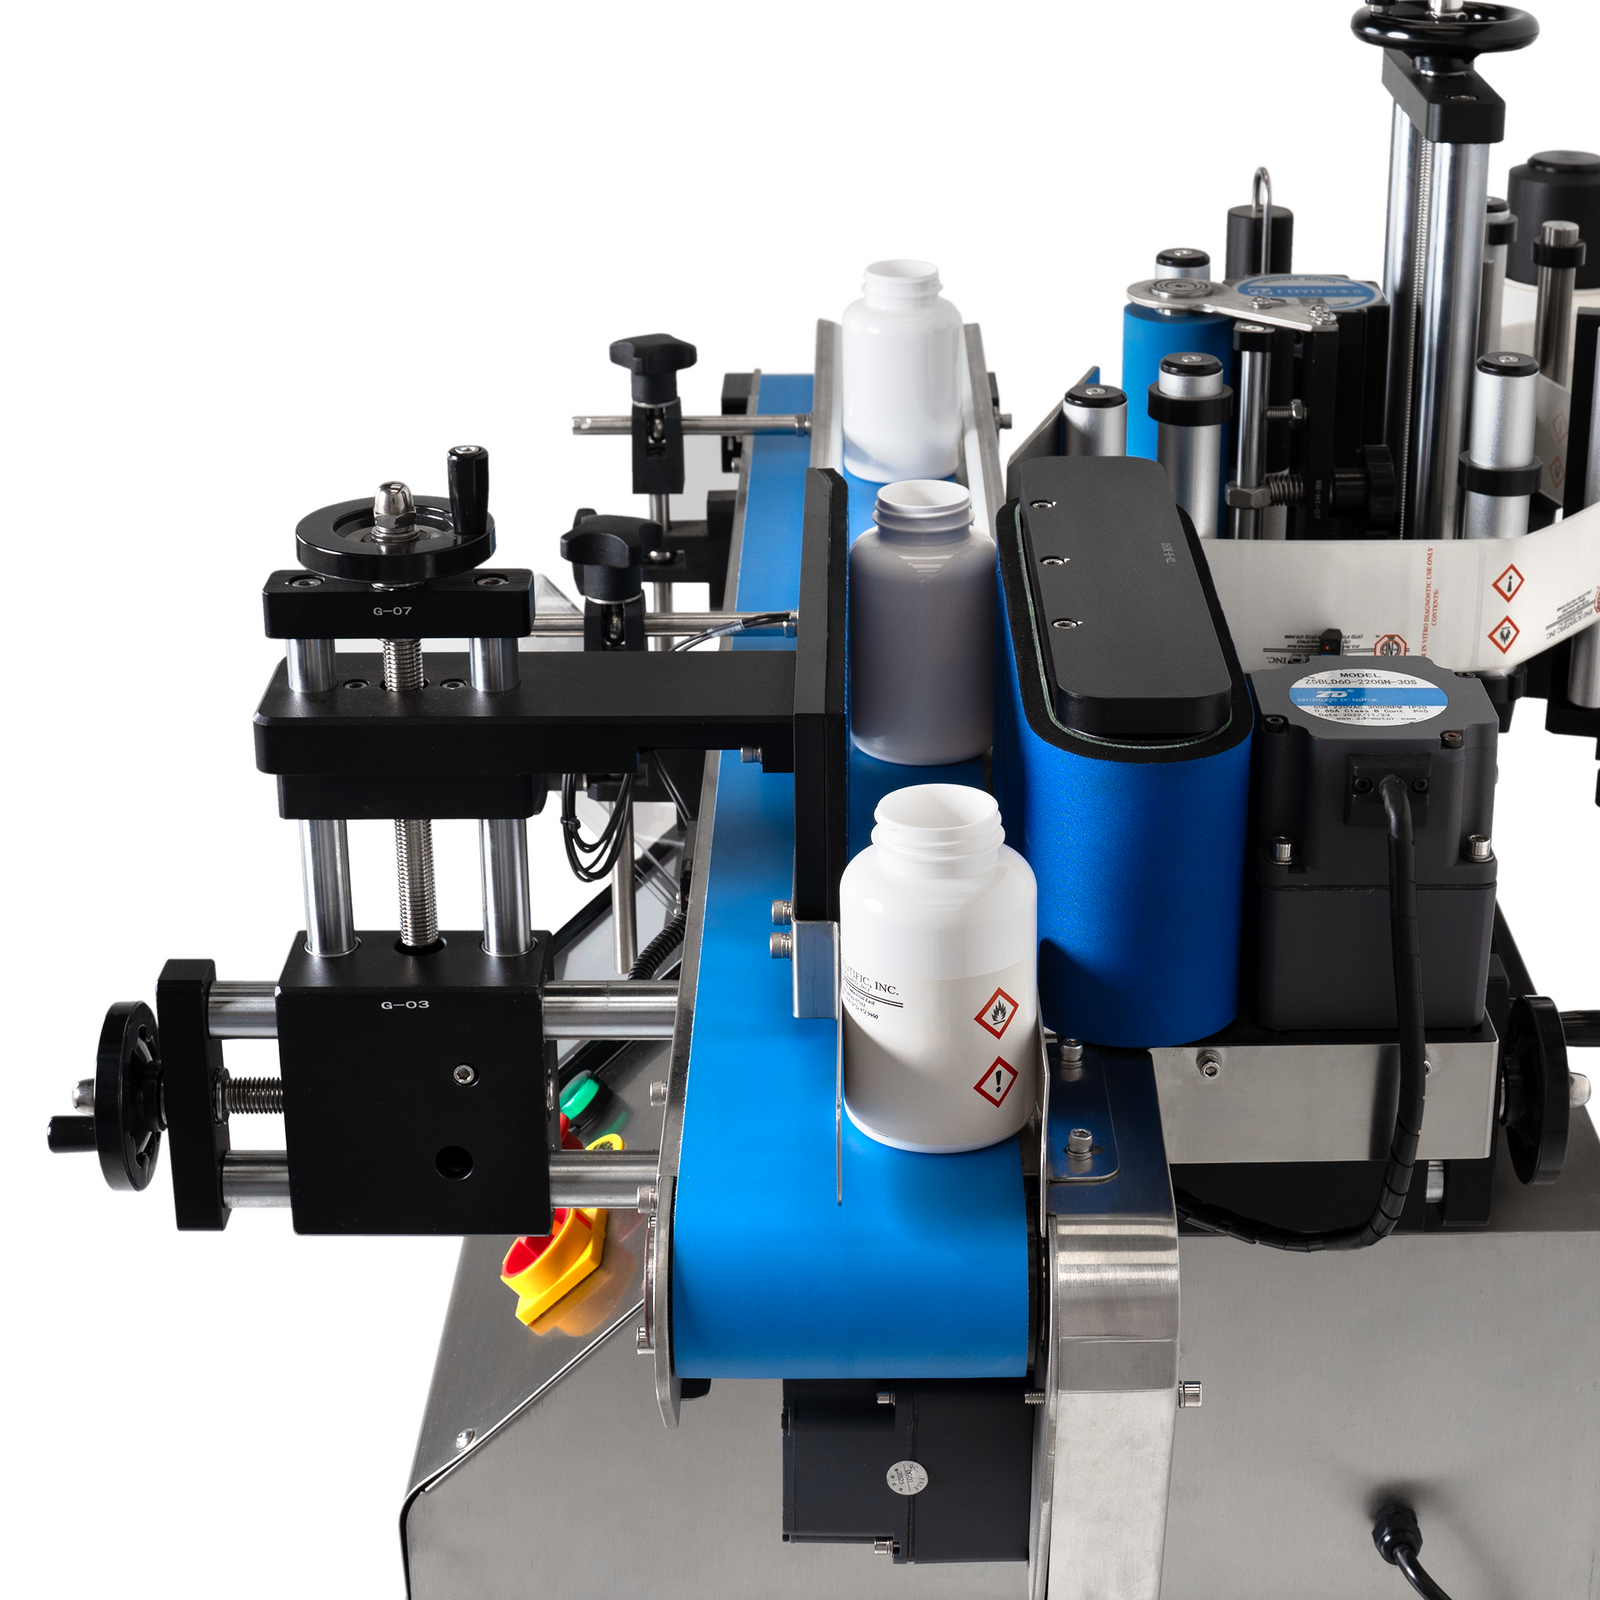 Label Applicator machine for high precision with conveyor for round containers in a production line